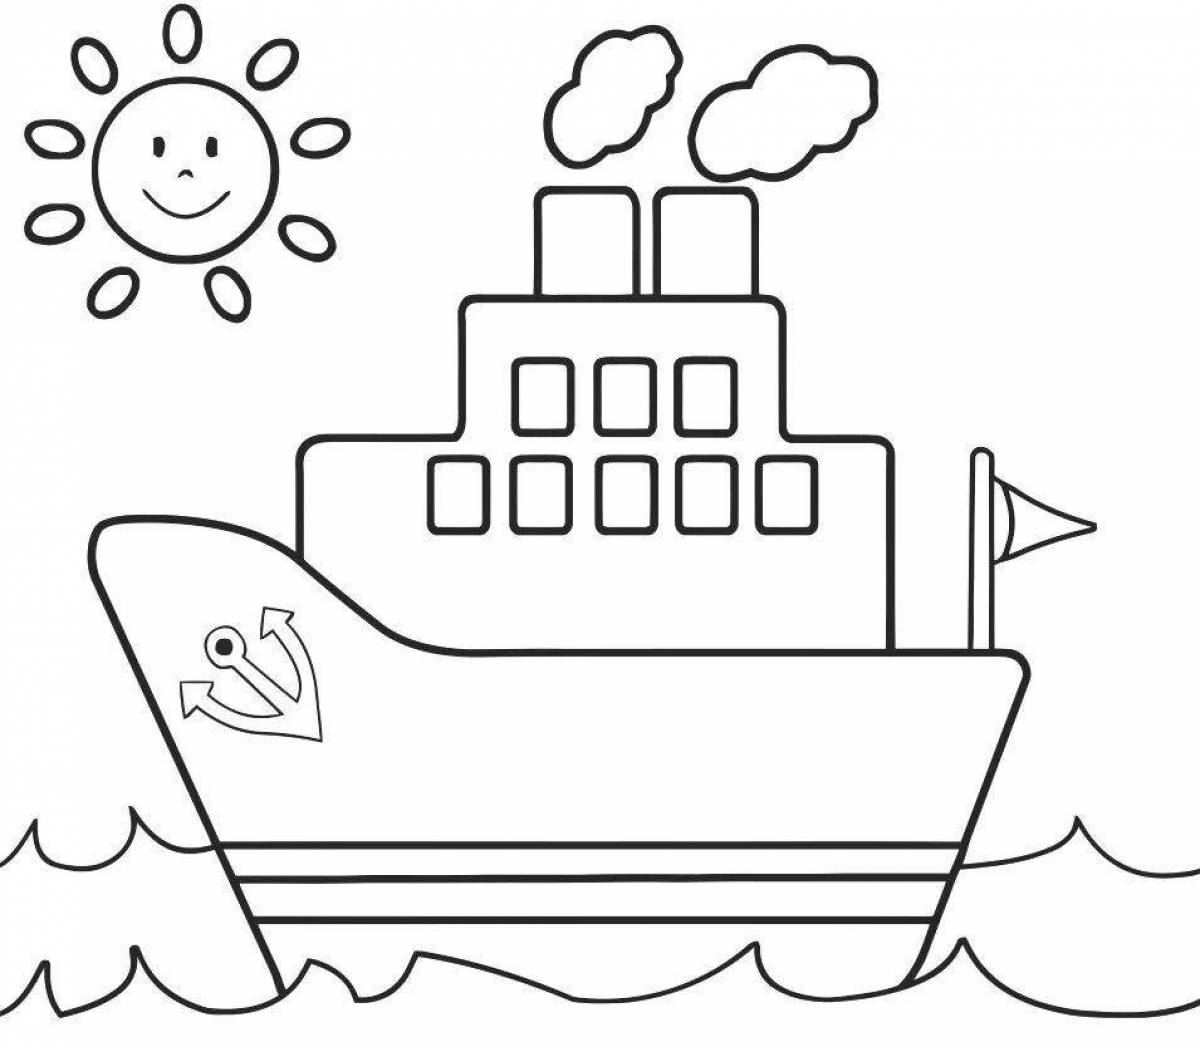 Fabulous ship coloring book for 5-6 year olds